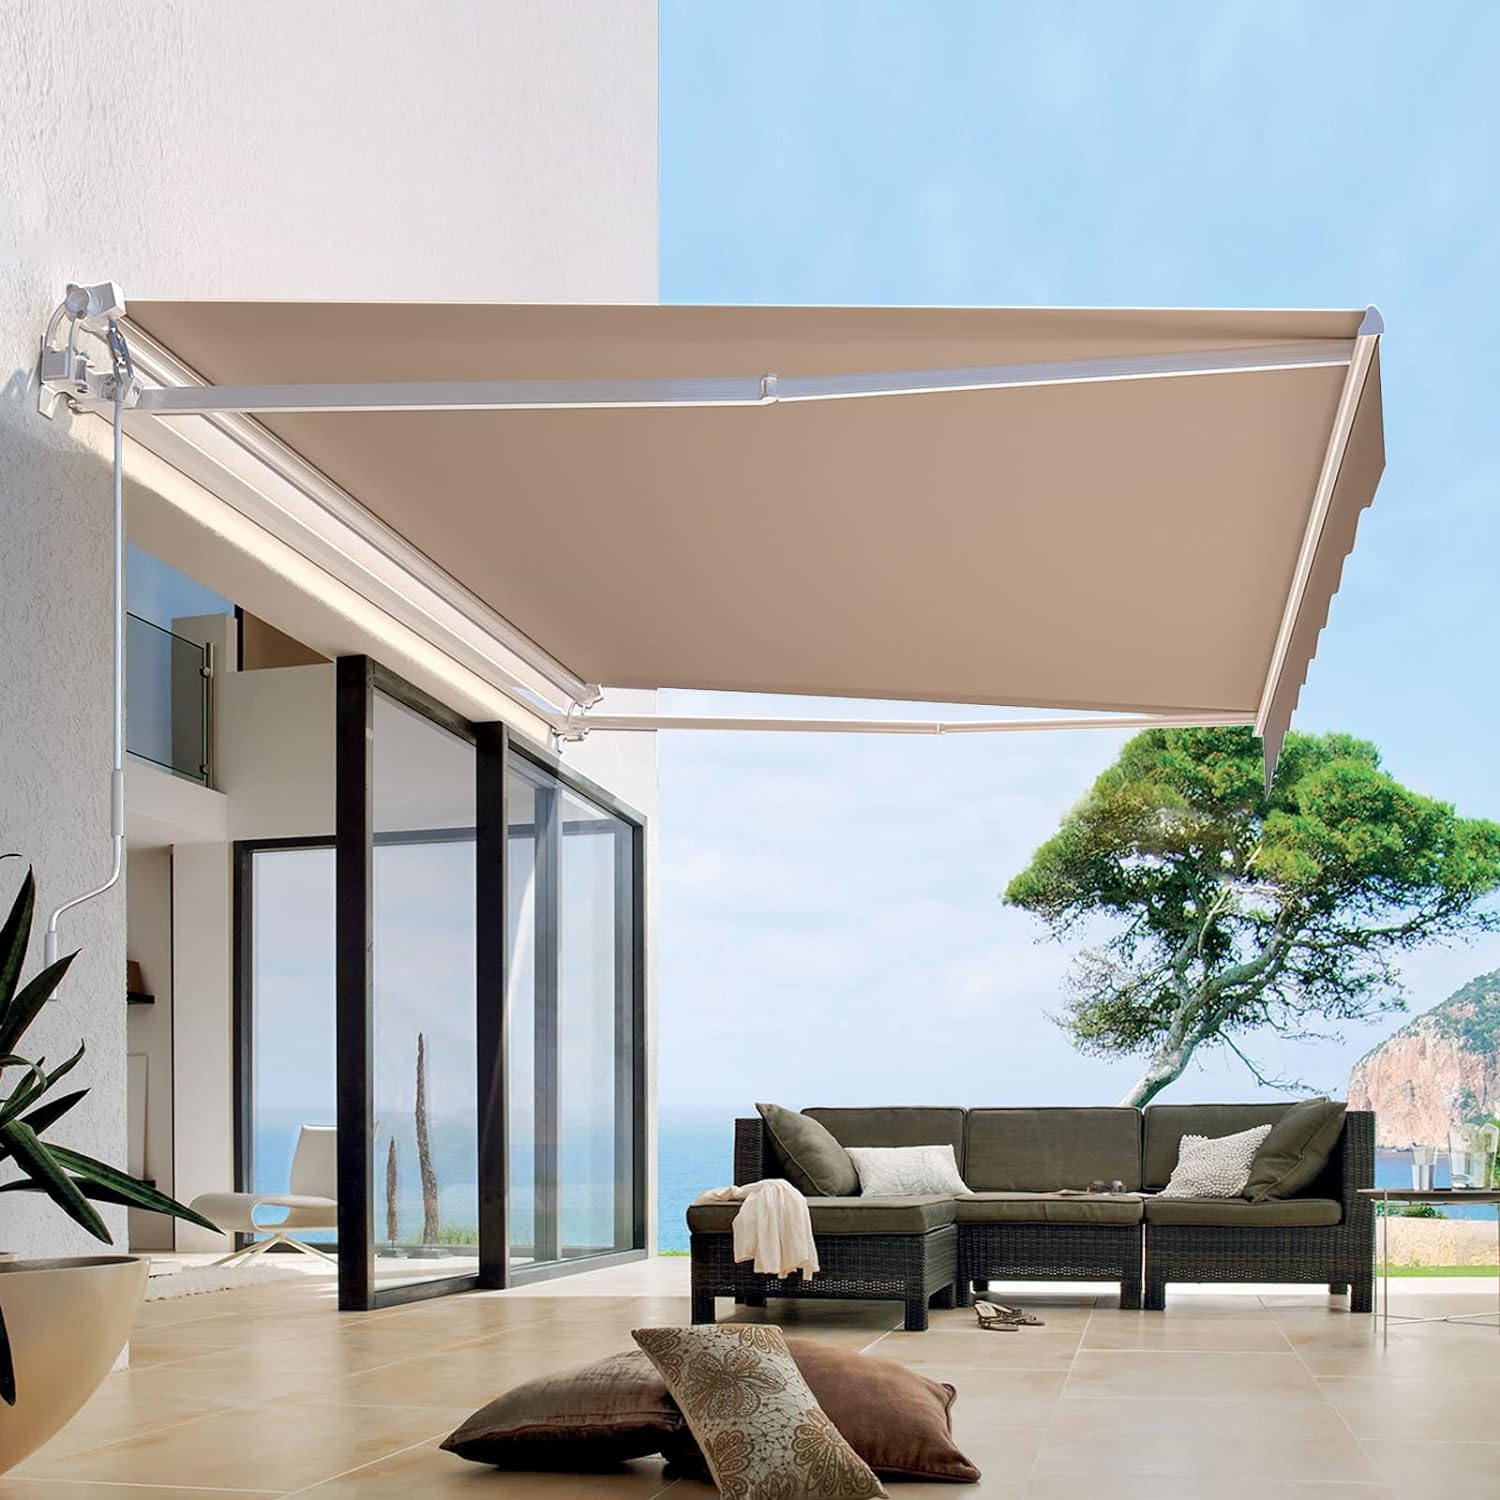 AECOJOY 13'8' Manual Retractable Awning Sun Shade Patio Awning Cover Outdoor Patio Canopy Sunsetter Deck Awnings with Manual Crank Handle, Beige